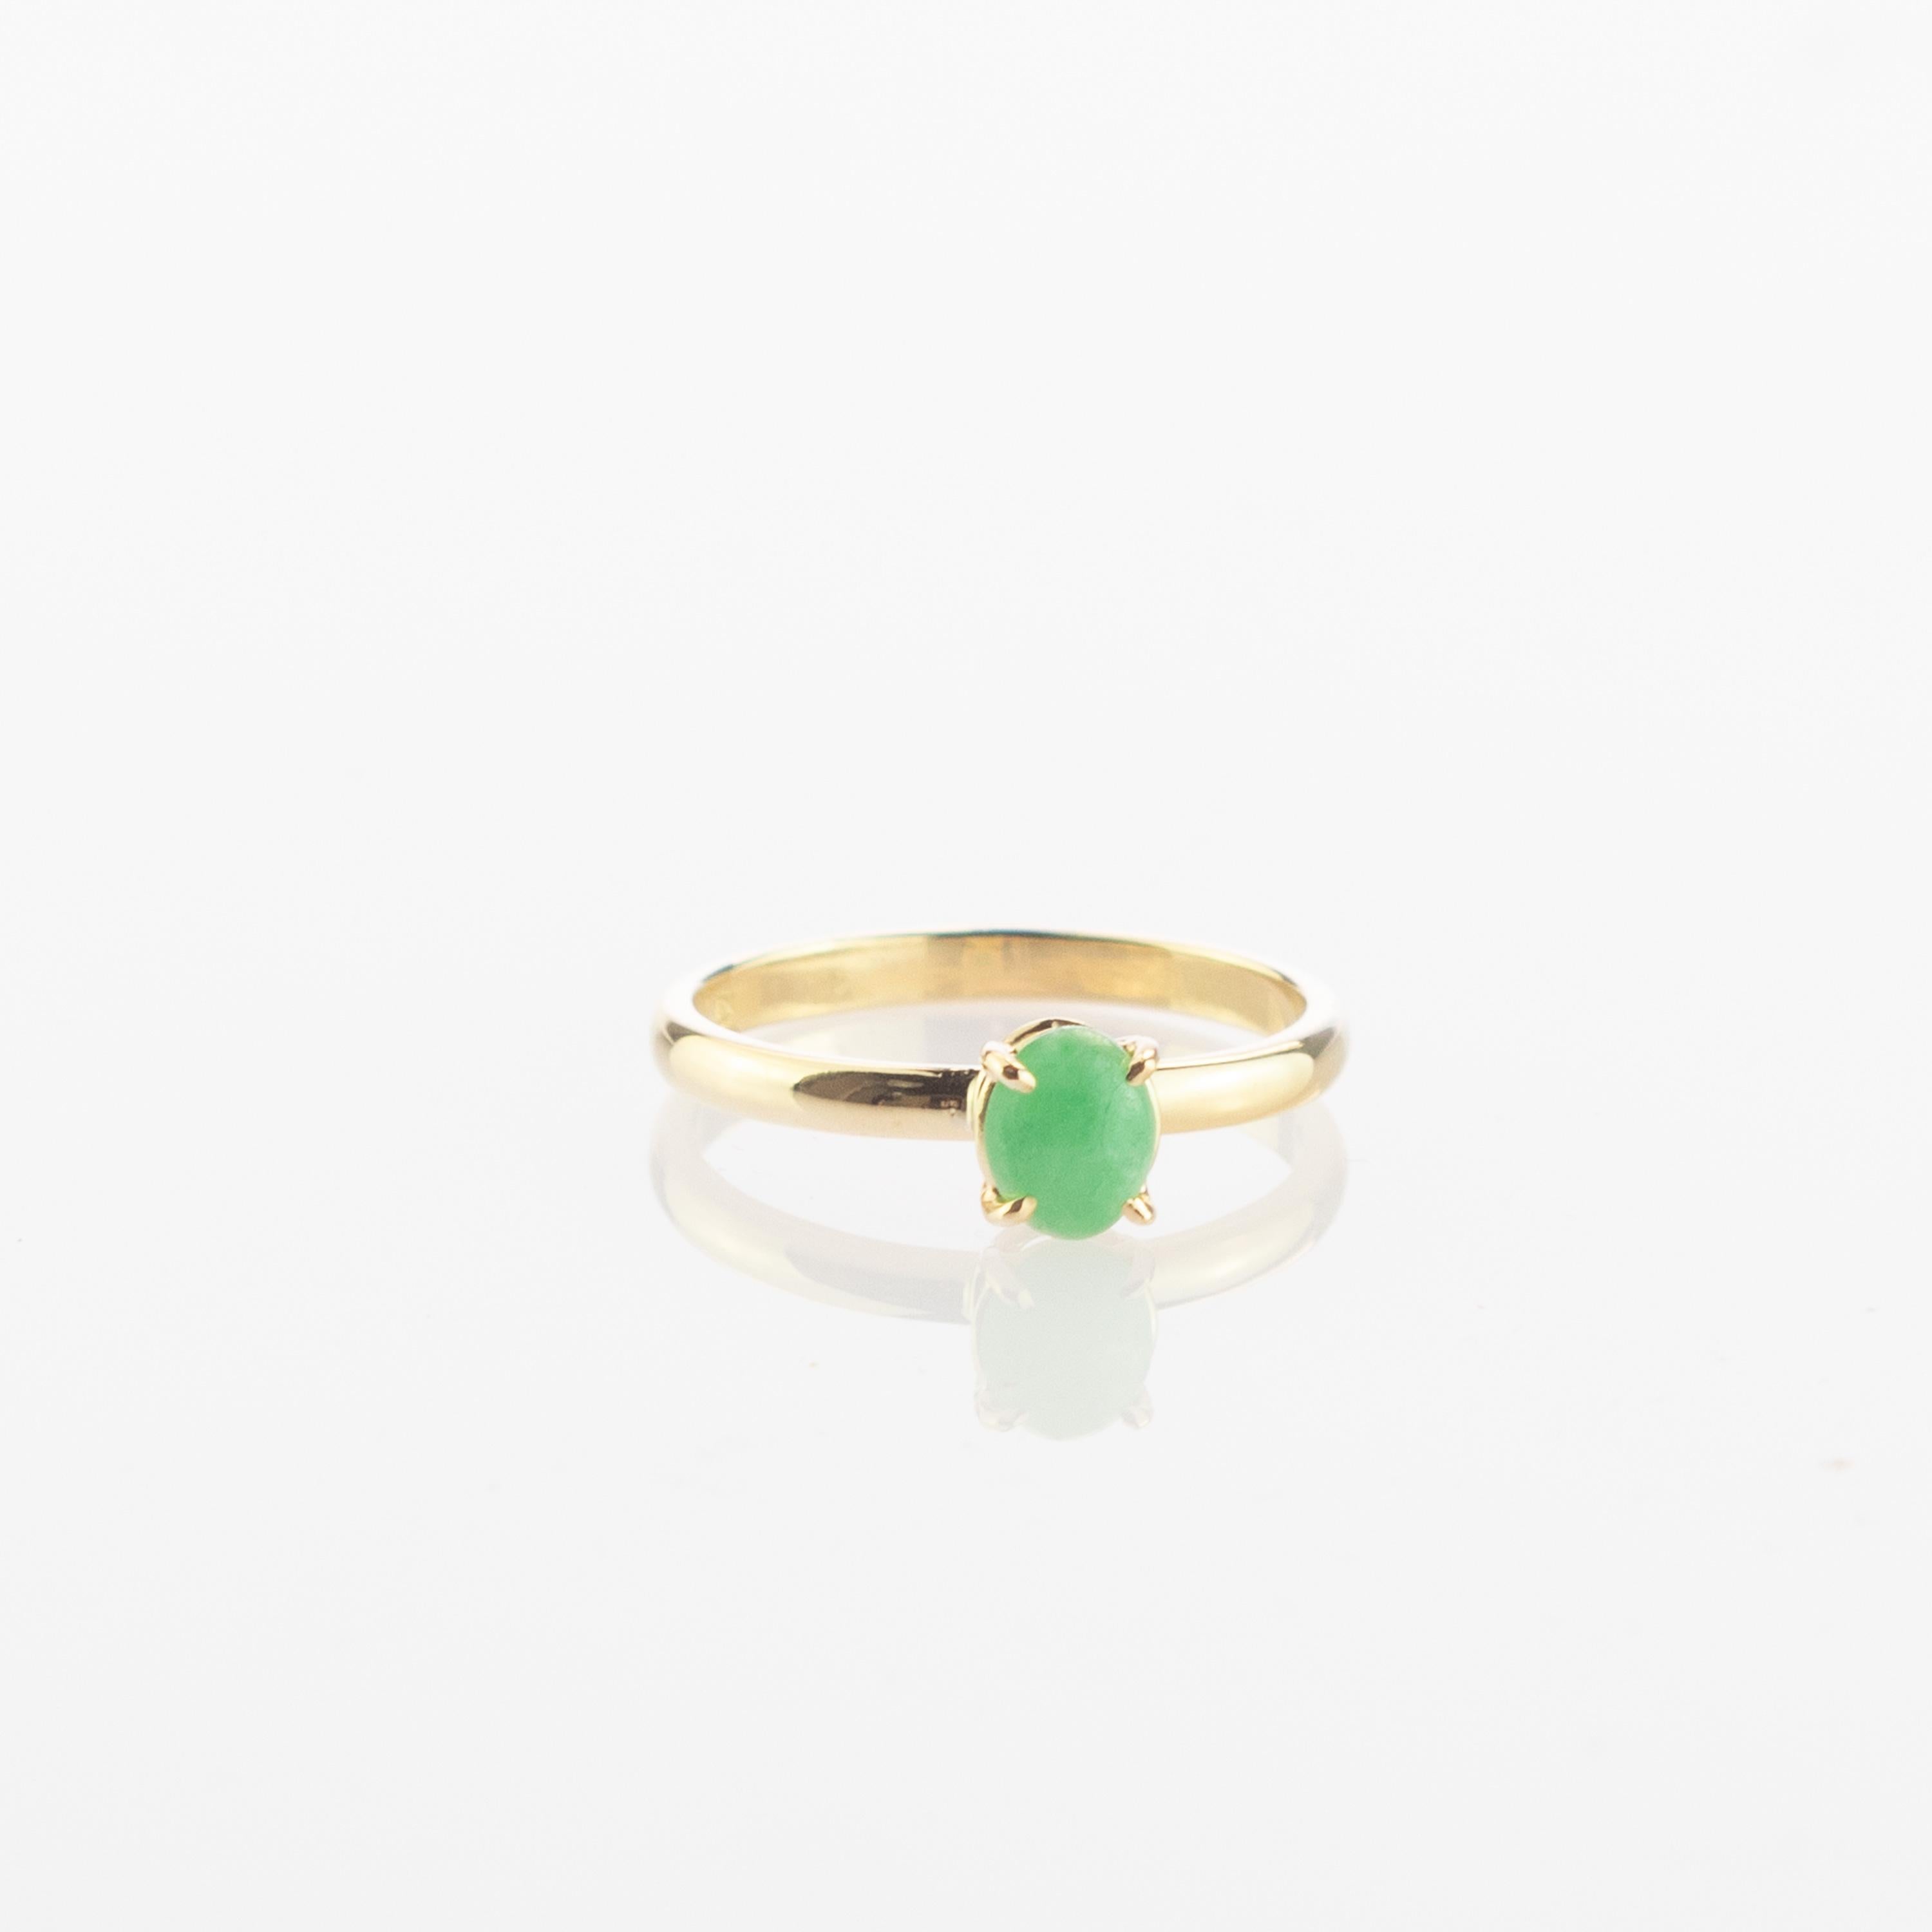 Oval Cut Intini Jewels 0.5 Carat Green Jade 18 Karat Yellow Gold Cocktail Chic Oval Ring For Sale